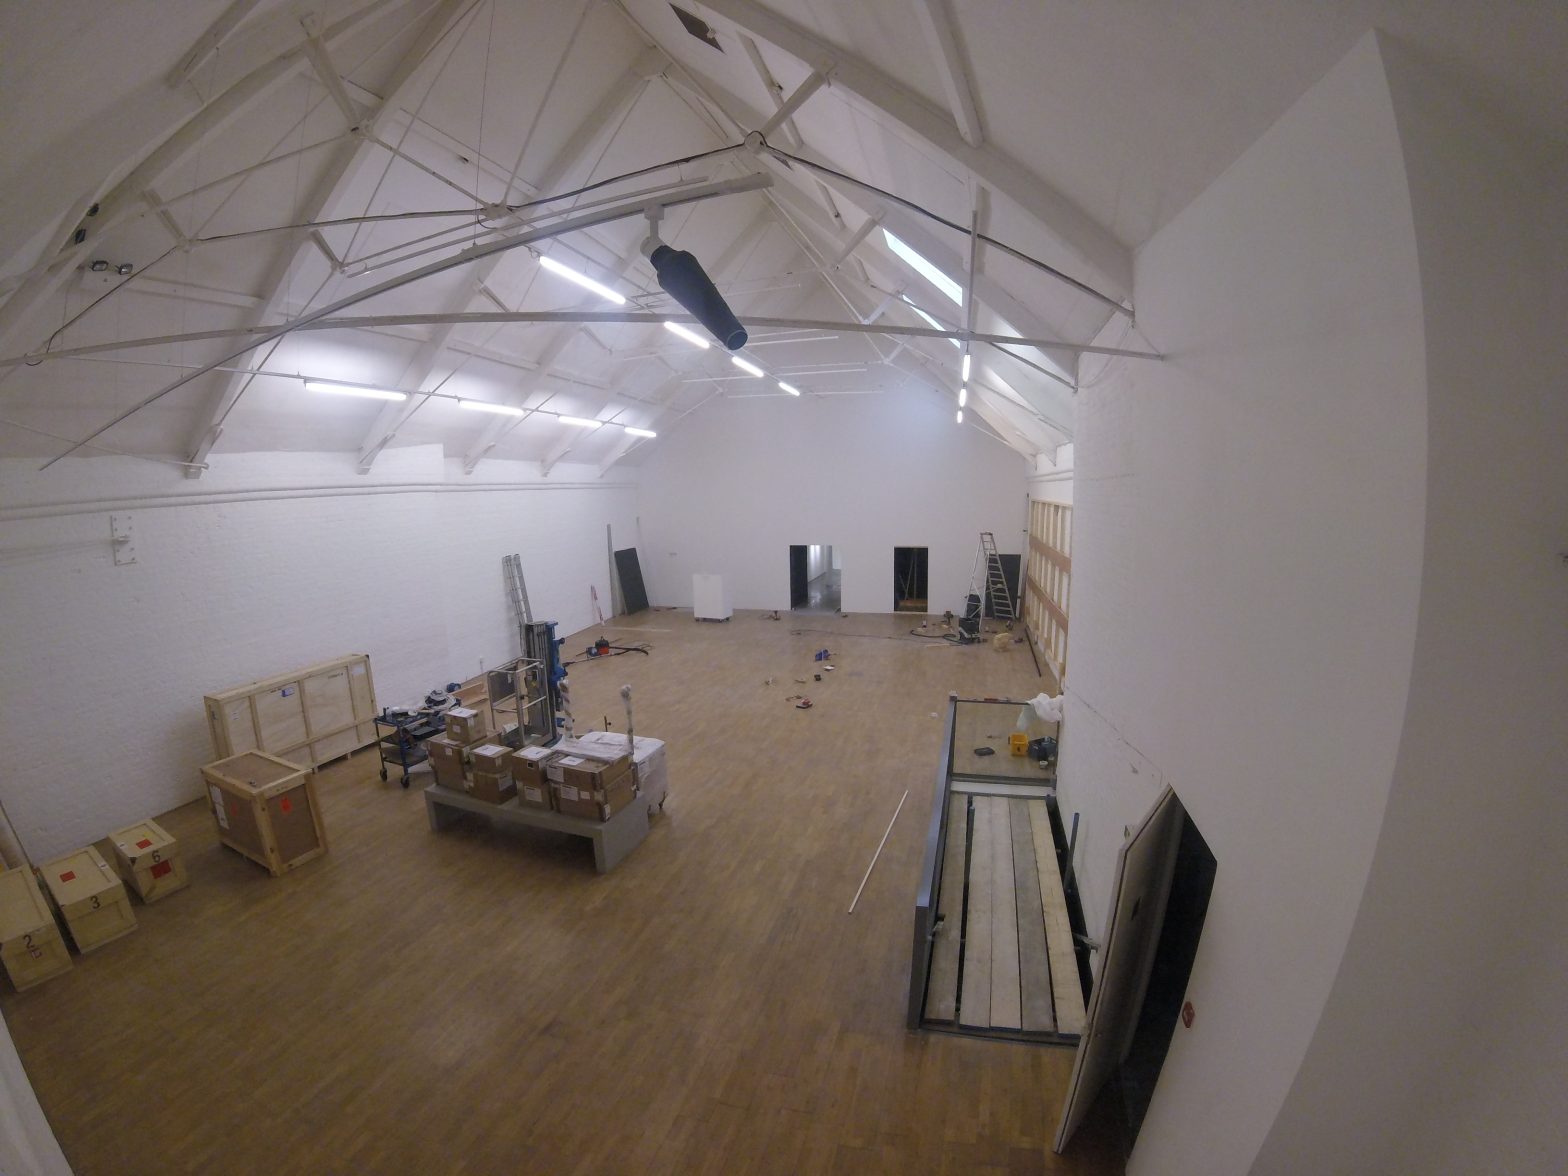 A photograph of the gallery in Modern Art Oxford being set up for KALEIDOSCOPE